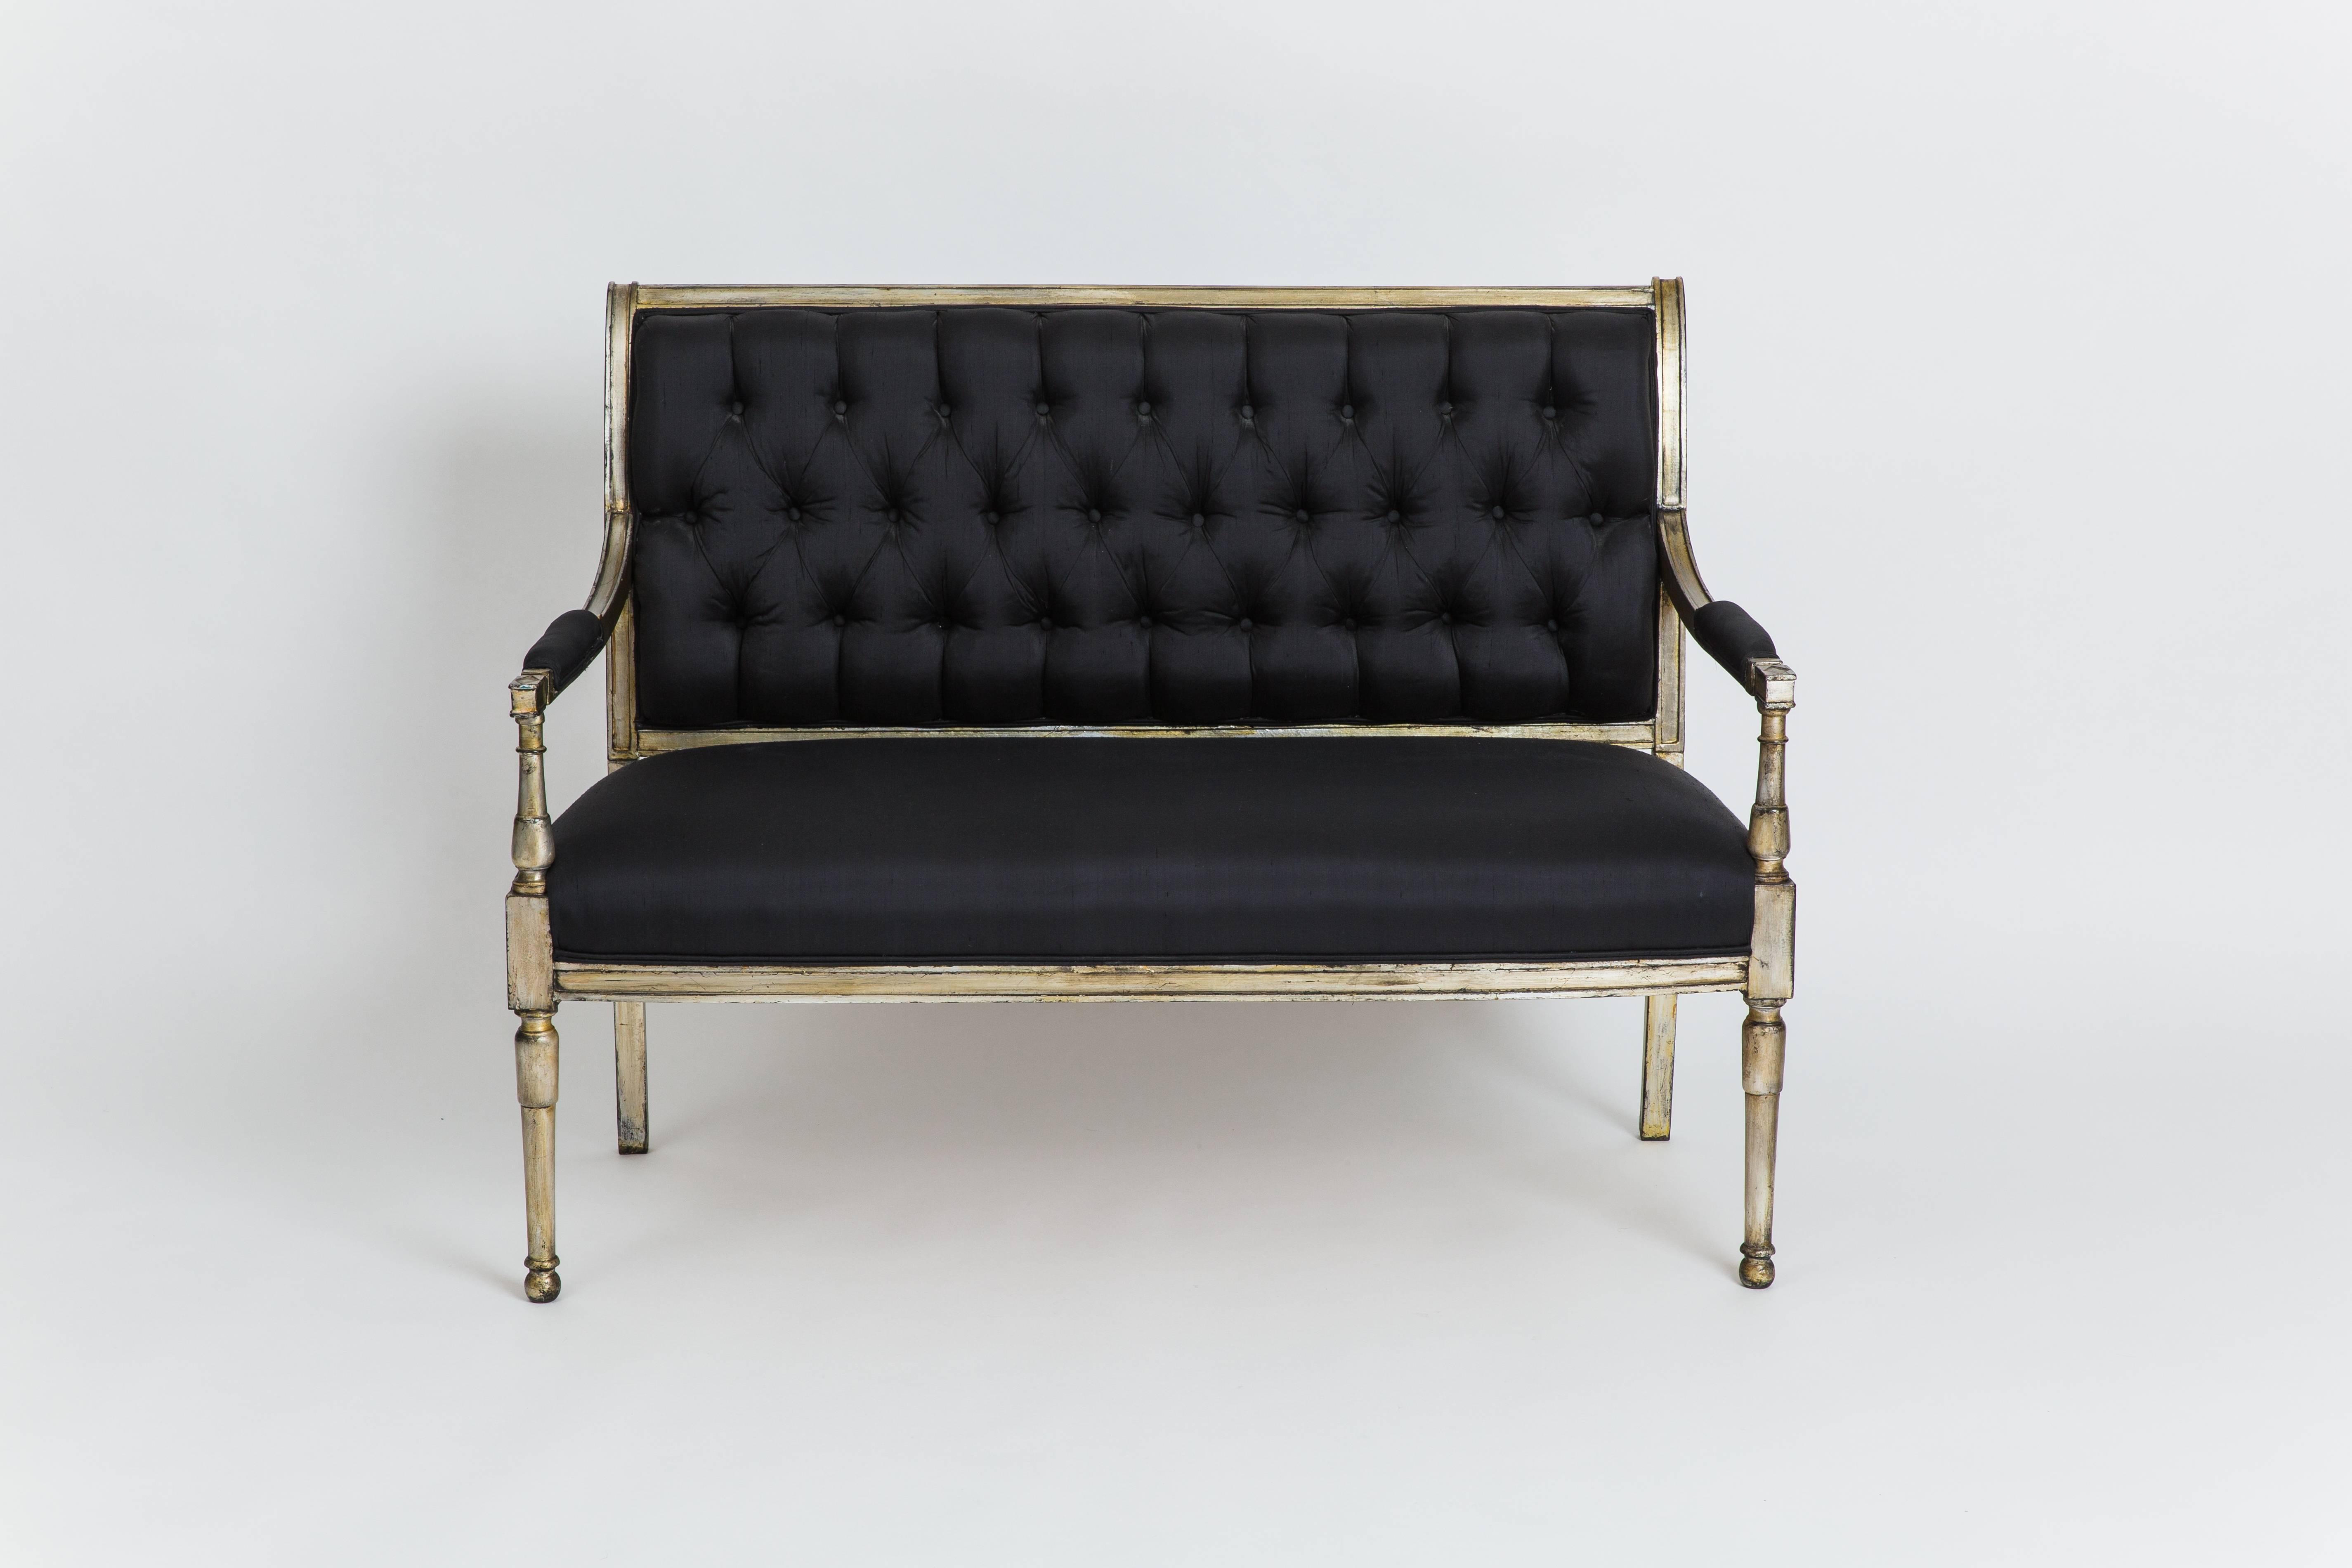 Exquisite and elegant Directoire style silver leaf settee with black raw silk upholstery on tufted back, seat and padded arms, France, 1950s. This settee was likely designed as a special commission with stamp 'JANSEN' and original label 'Monsieur